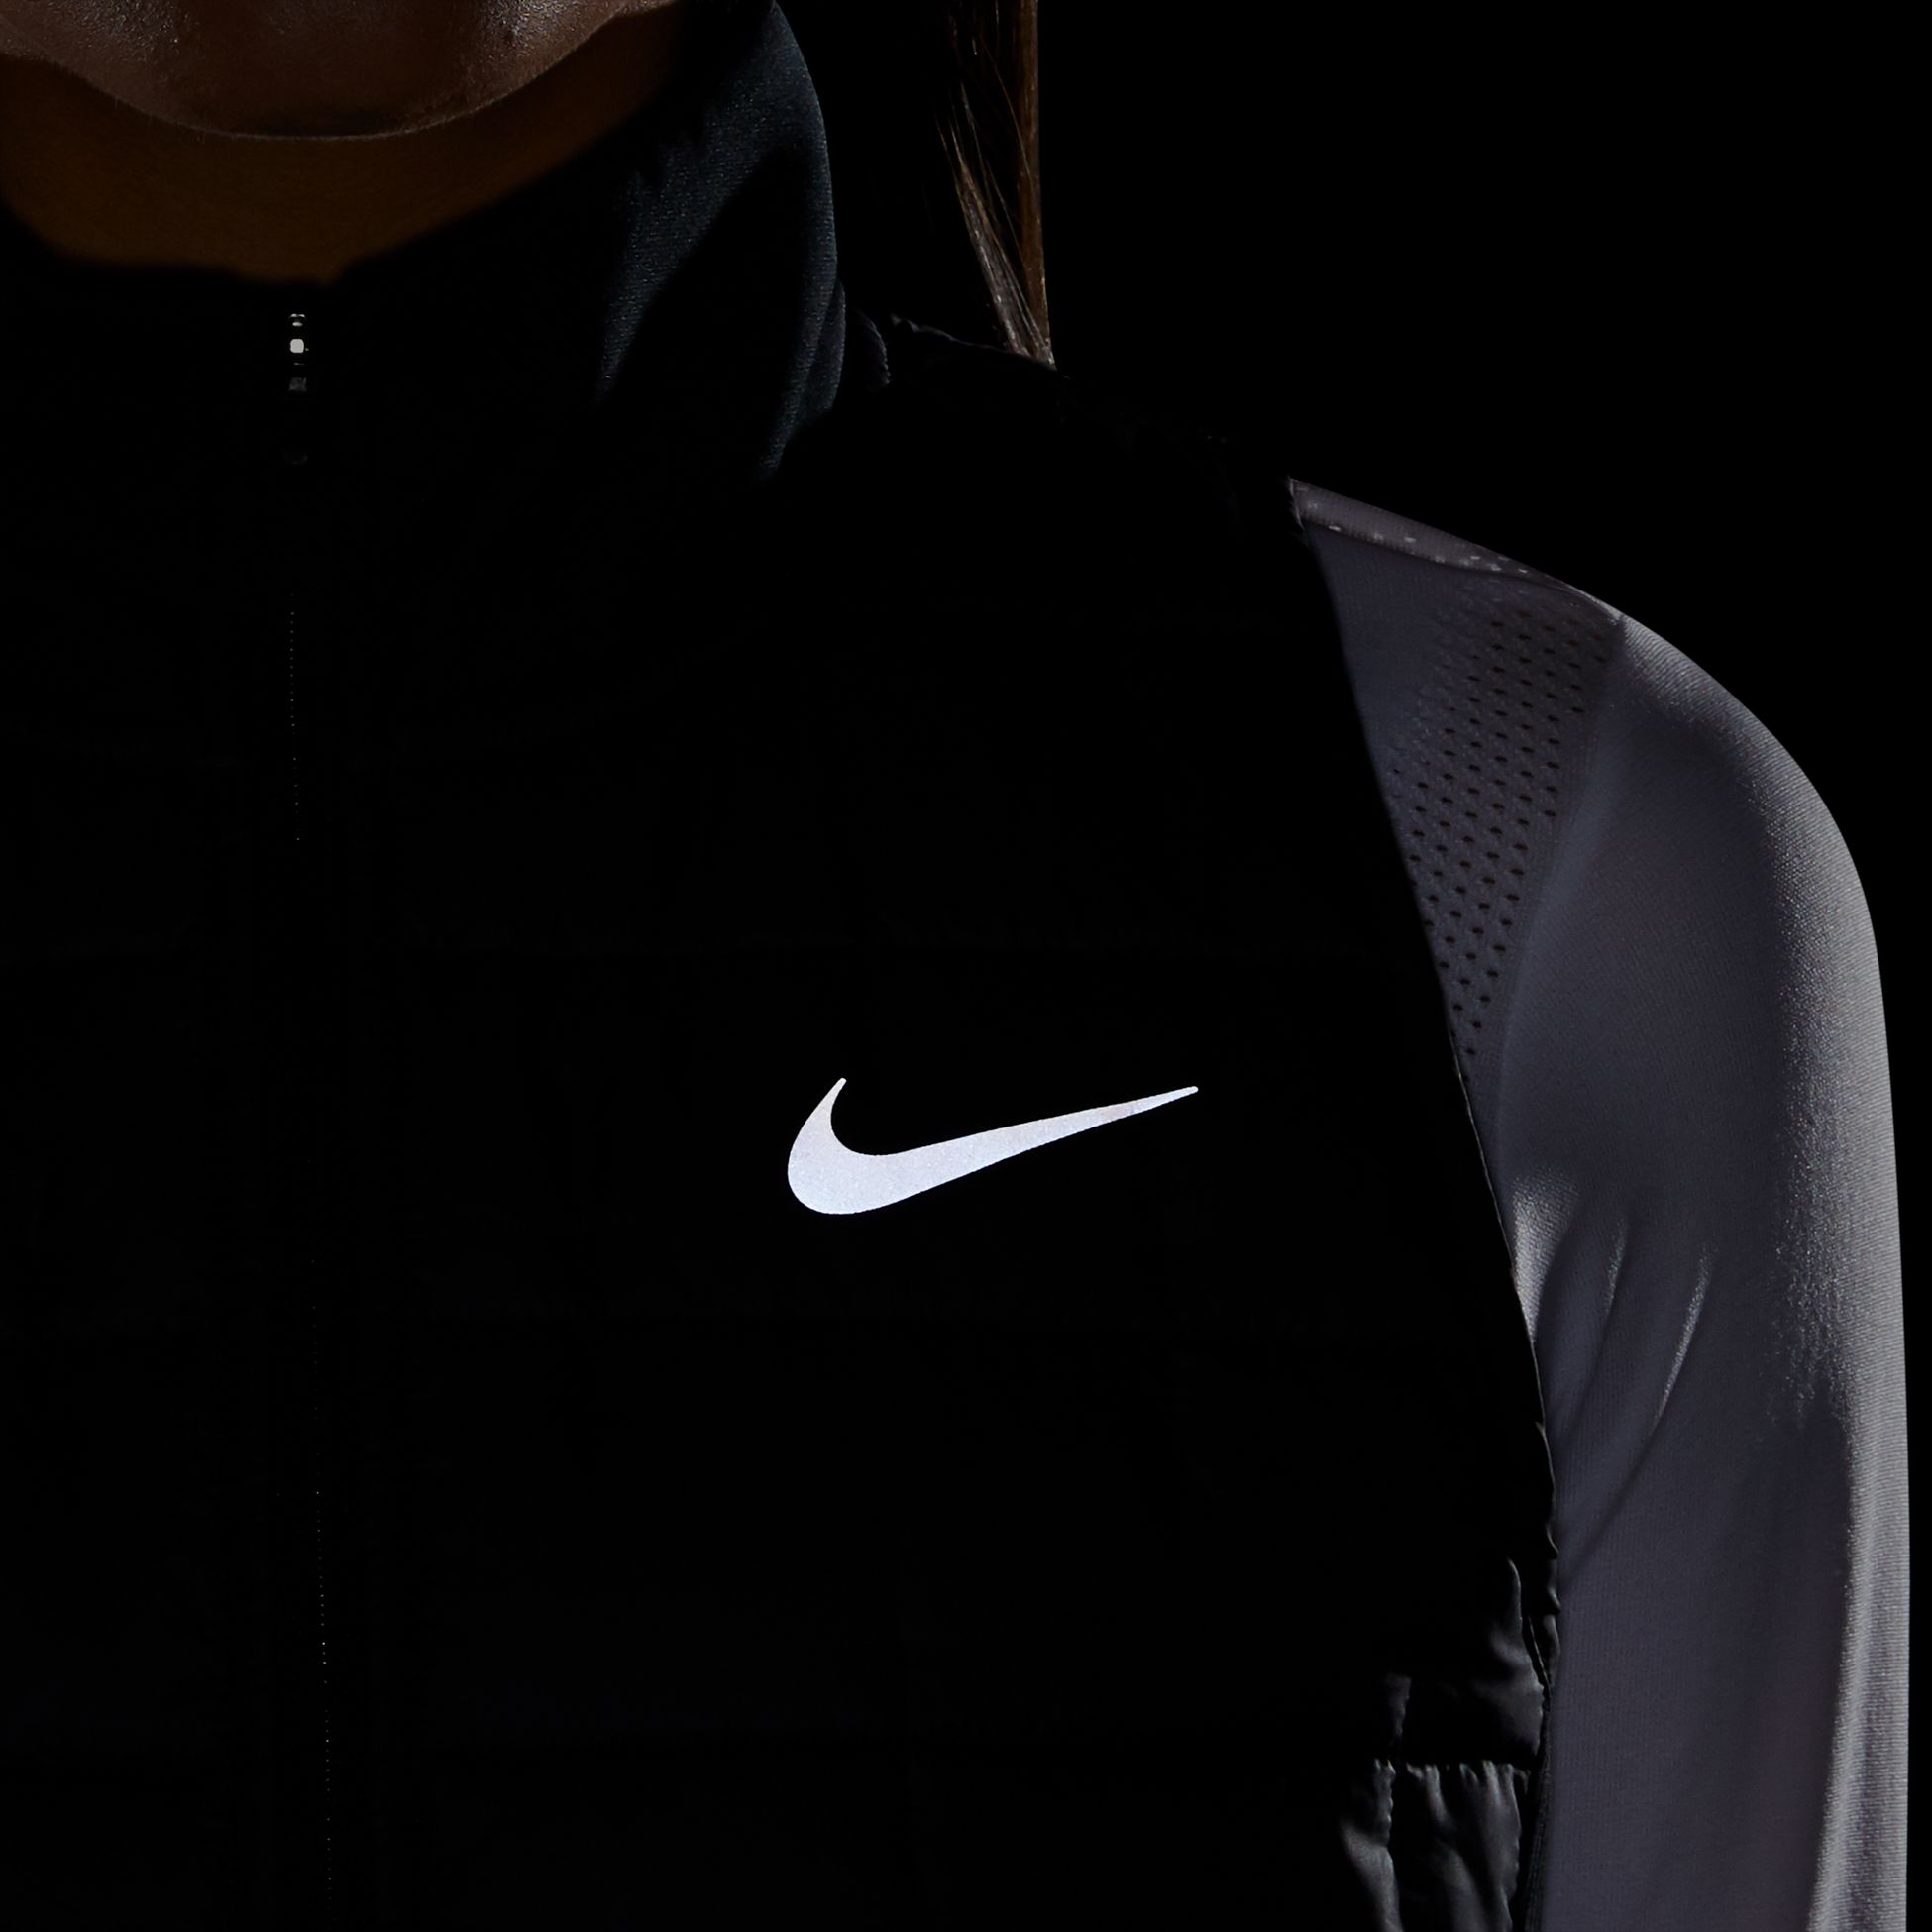 NIKE, W NK THERMA-FIT FILL VEST